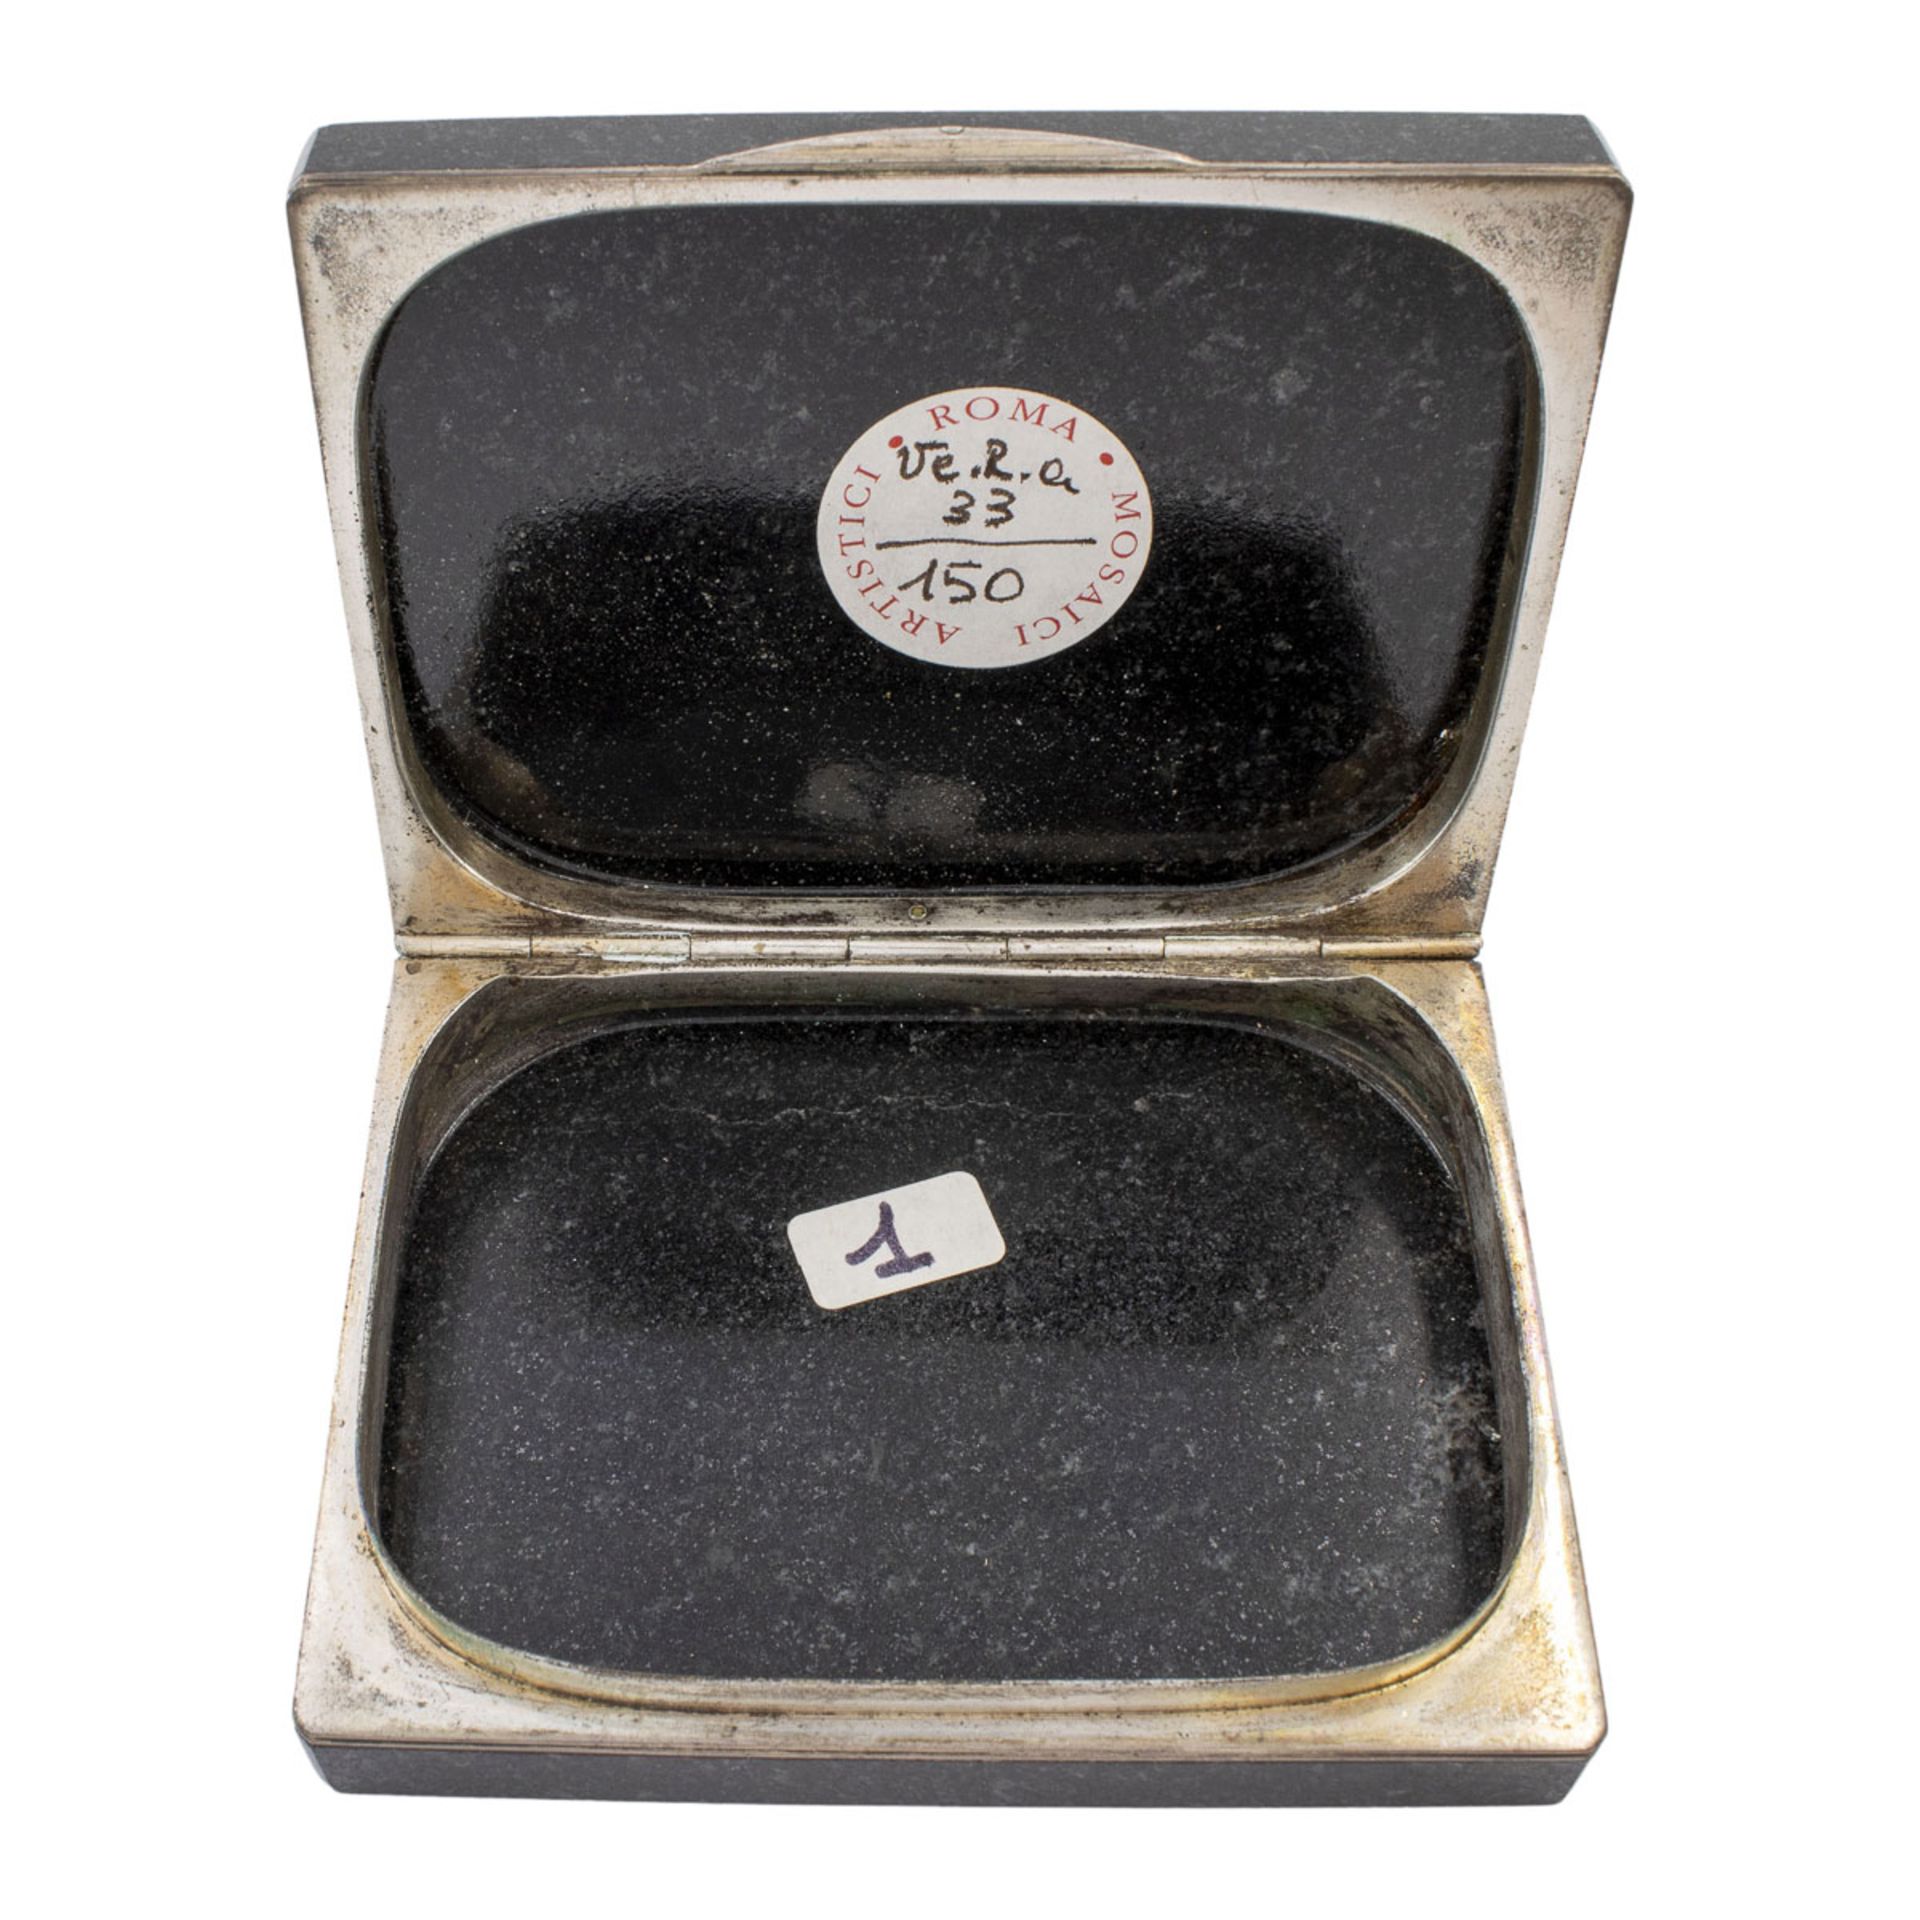 Granite, silver and micromosaic snuffbox - Image 3 of 3